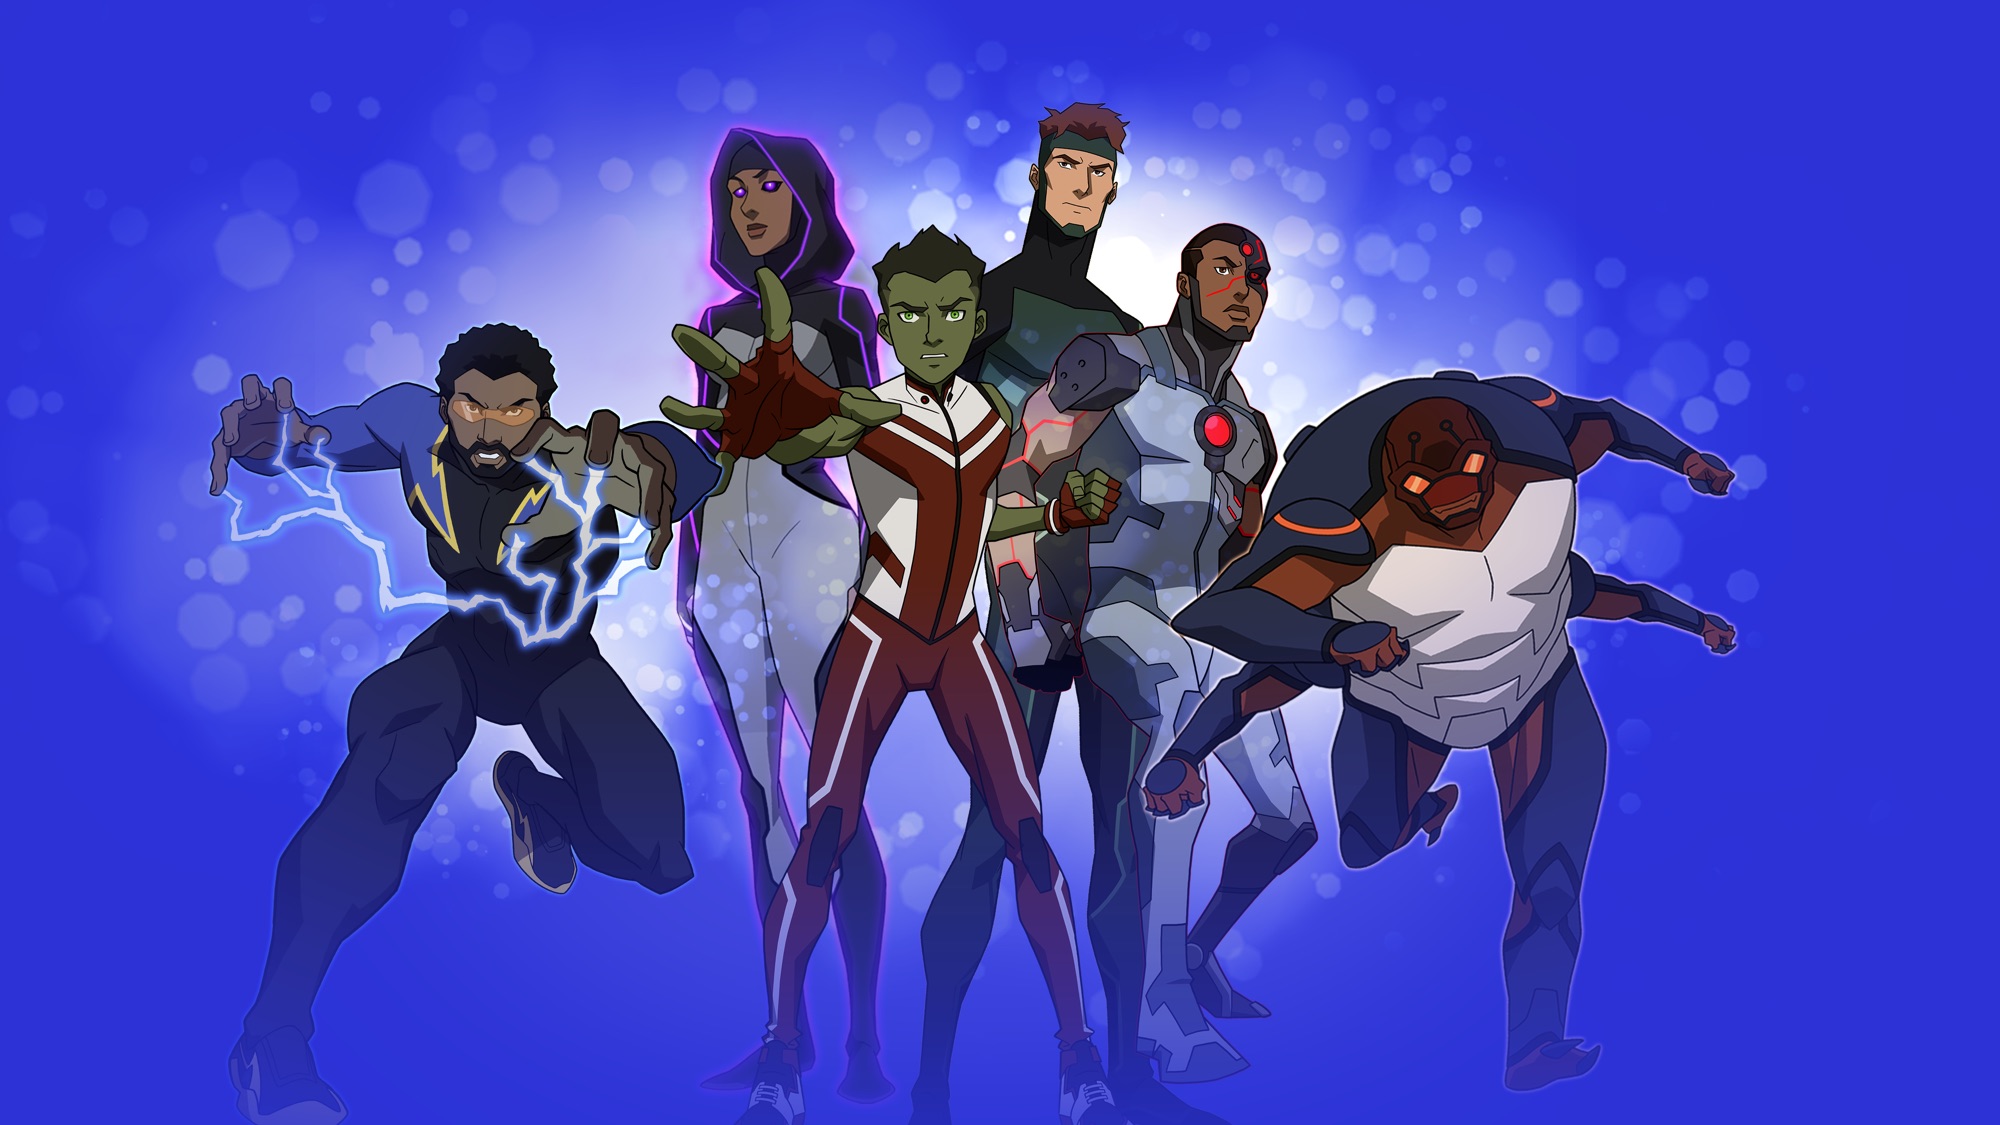 TV Show Young Justice 2000x1125